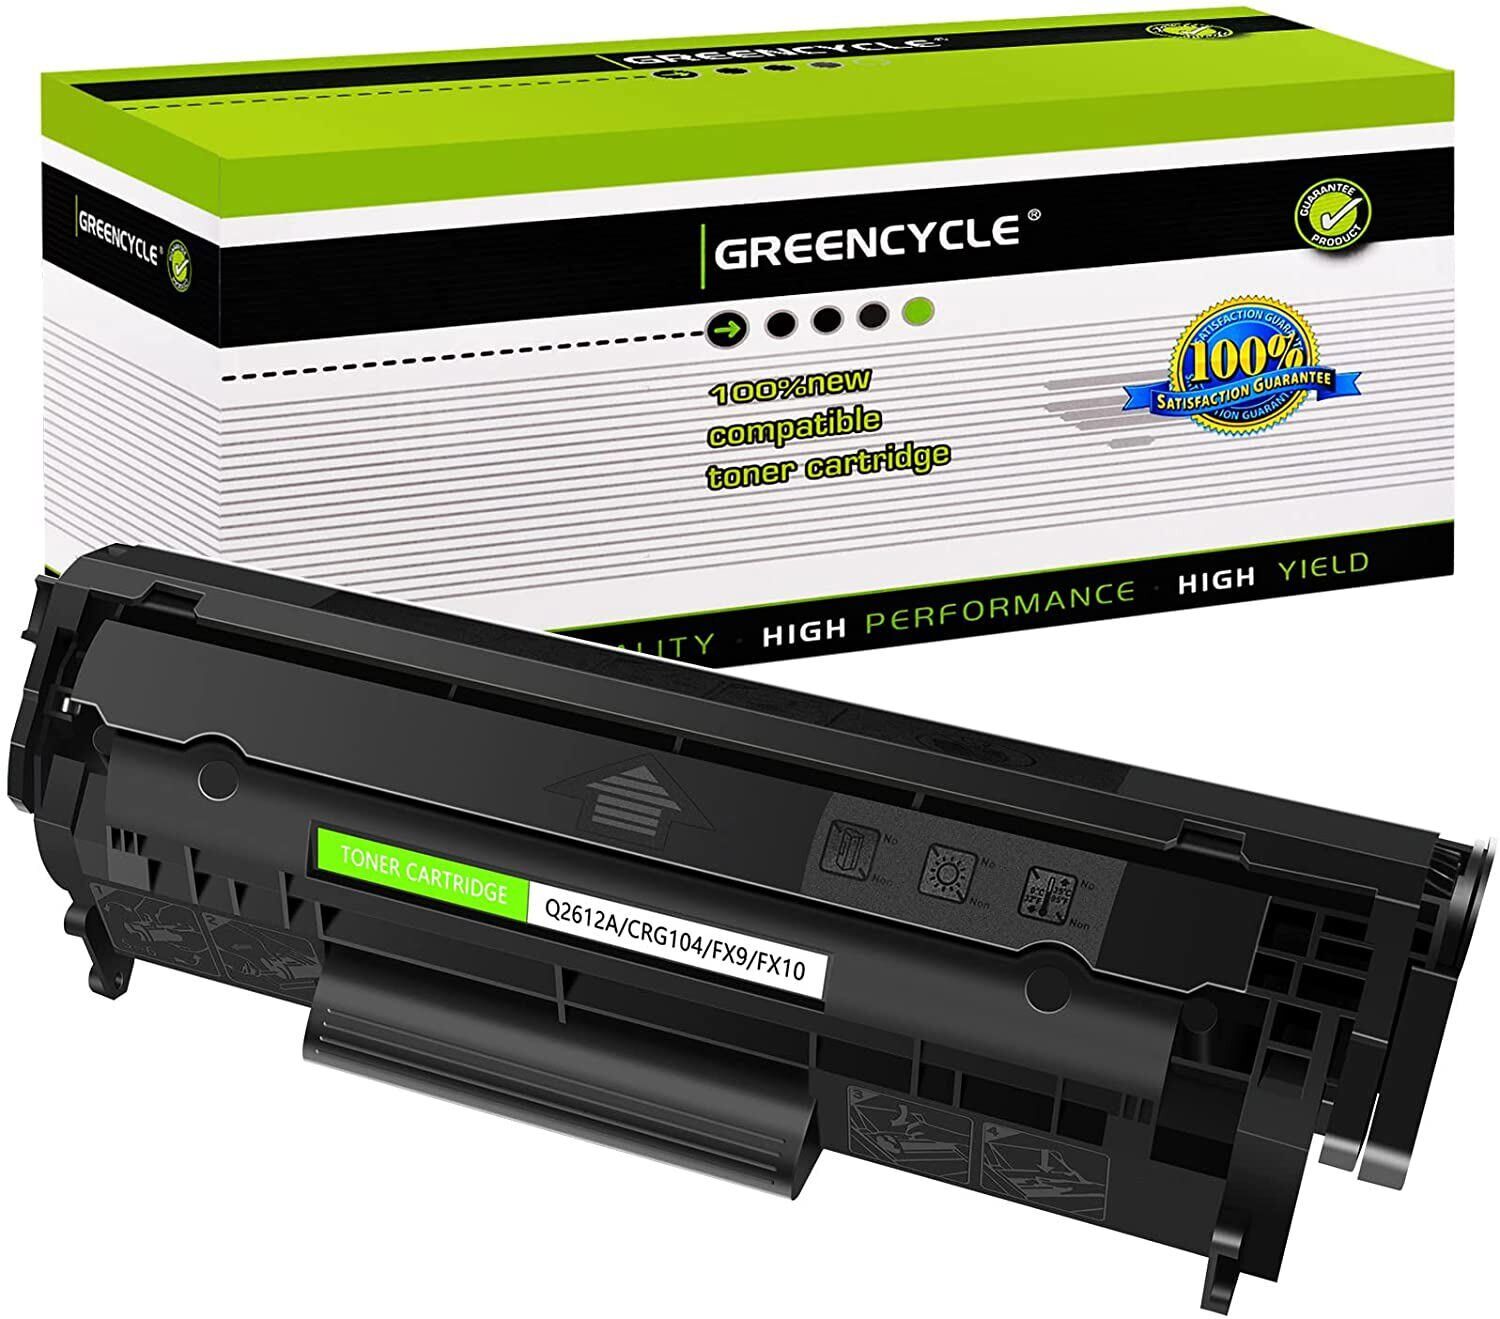 GREENCYCLE Q2612A 12A Toner Cartridge Compatible for HP LaserJet 1018 1022n 1012